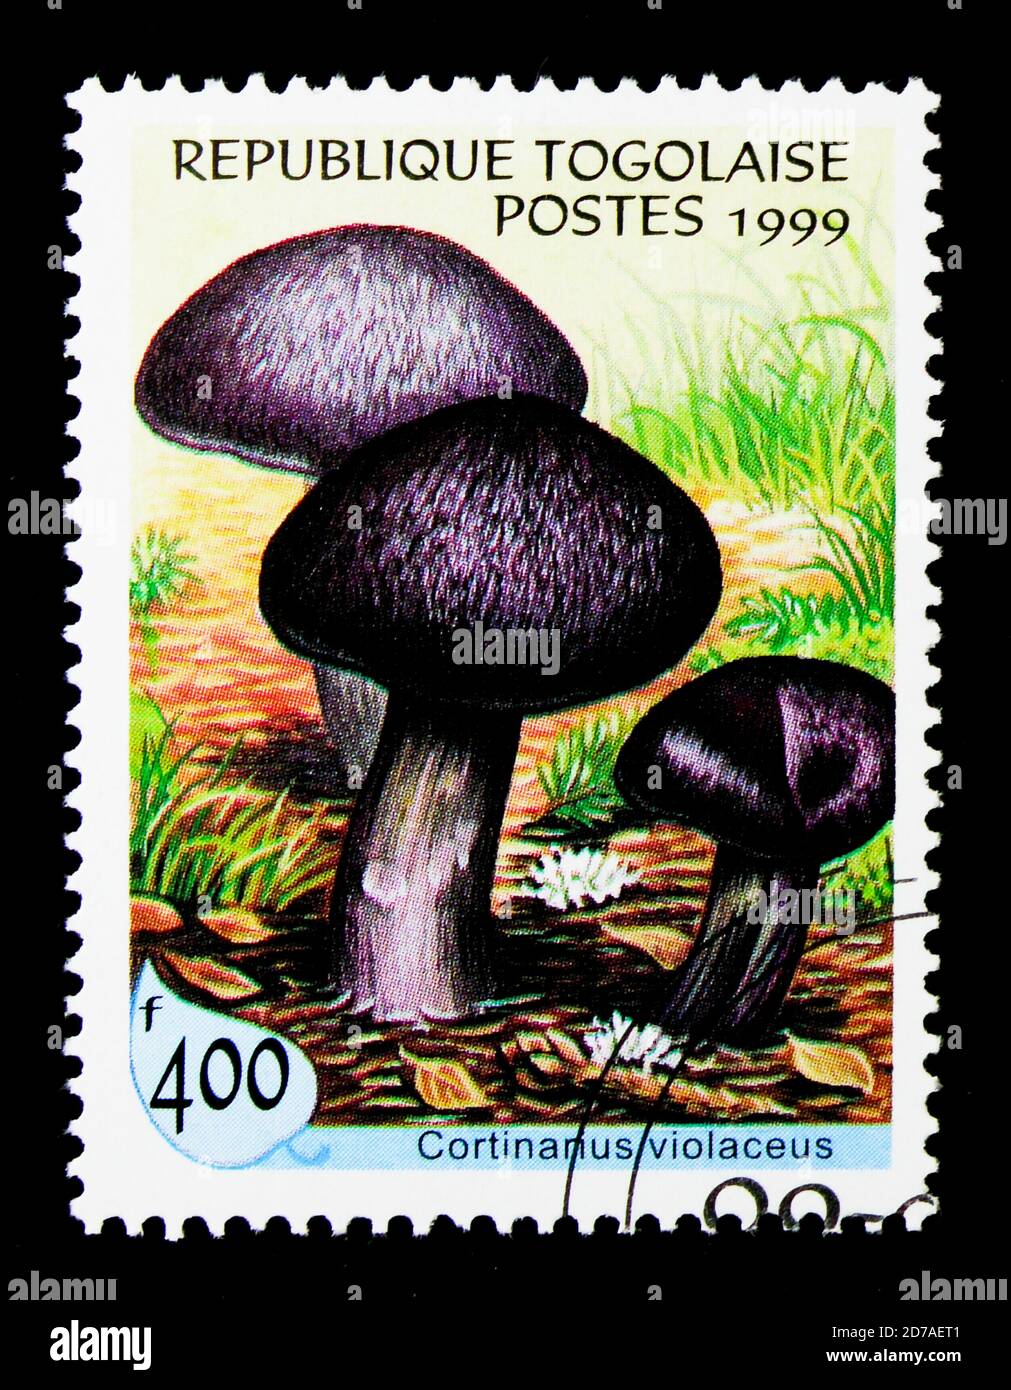 MOSCOW, RUSSIA - NOVEMBER 26, 2017: A stamp printed in Togo shows Cortinarius violaceus, Mushrooms serie, circa 1999 Stock Photo